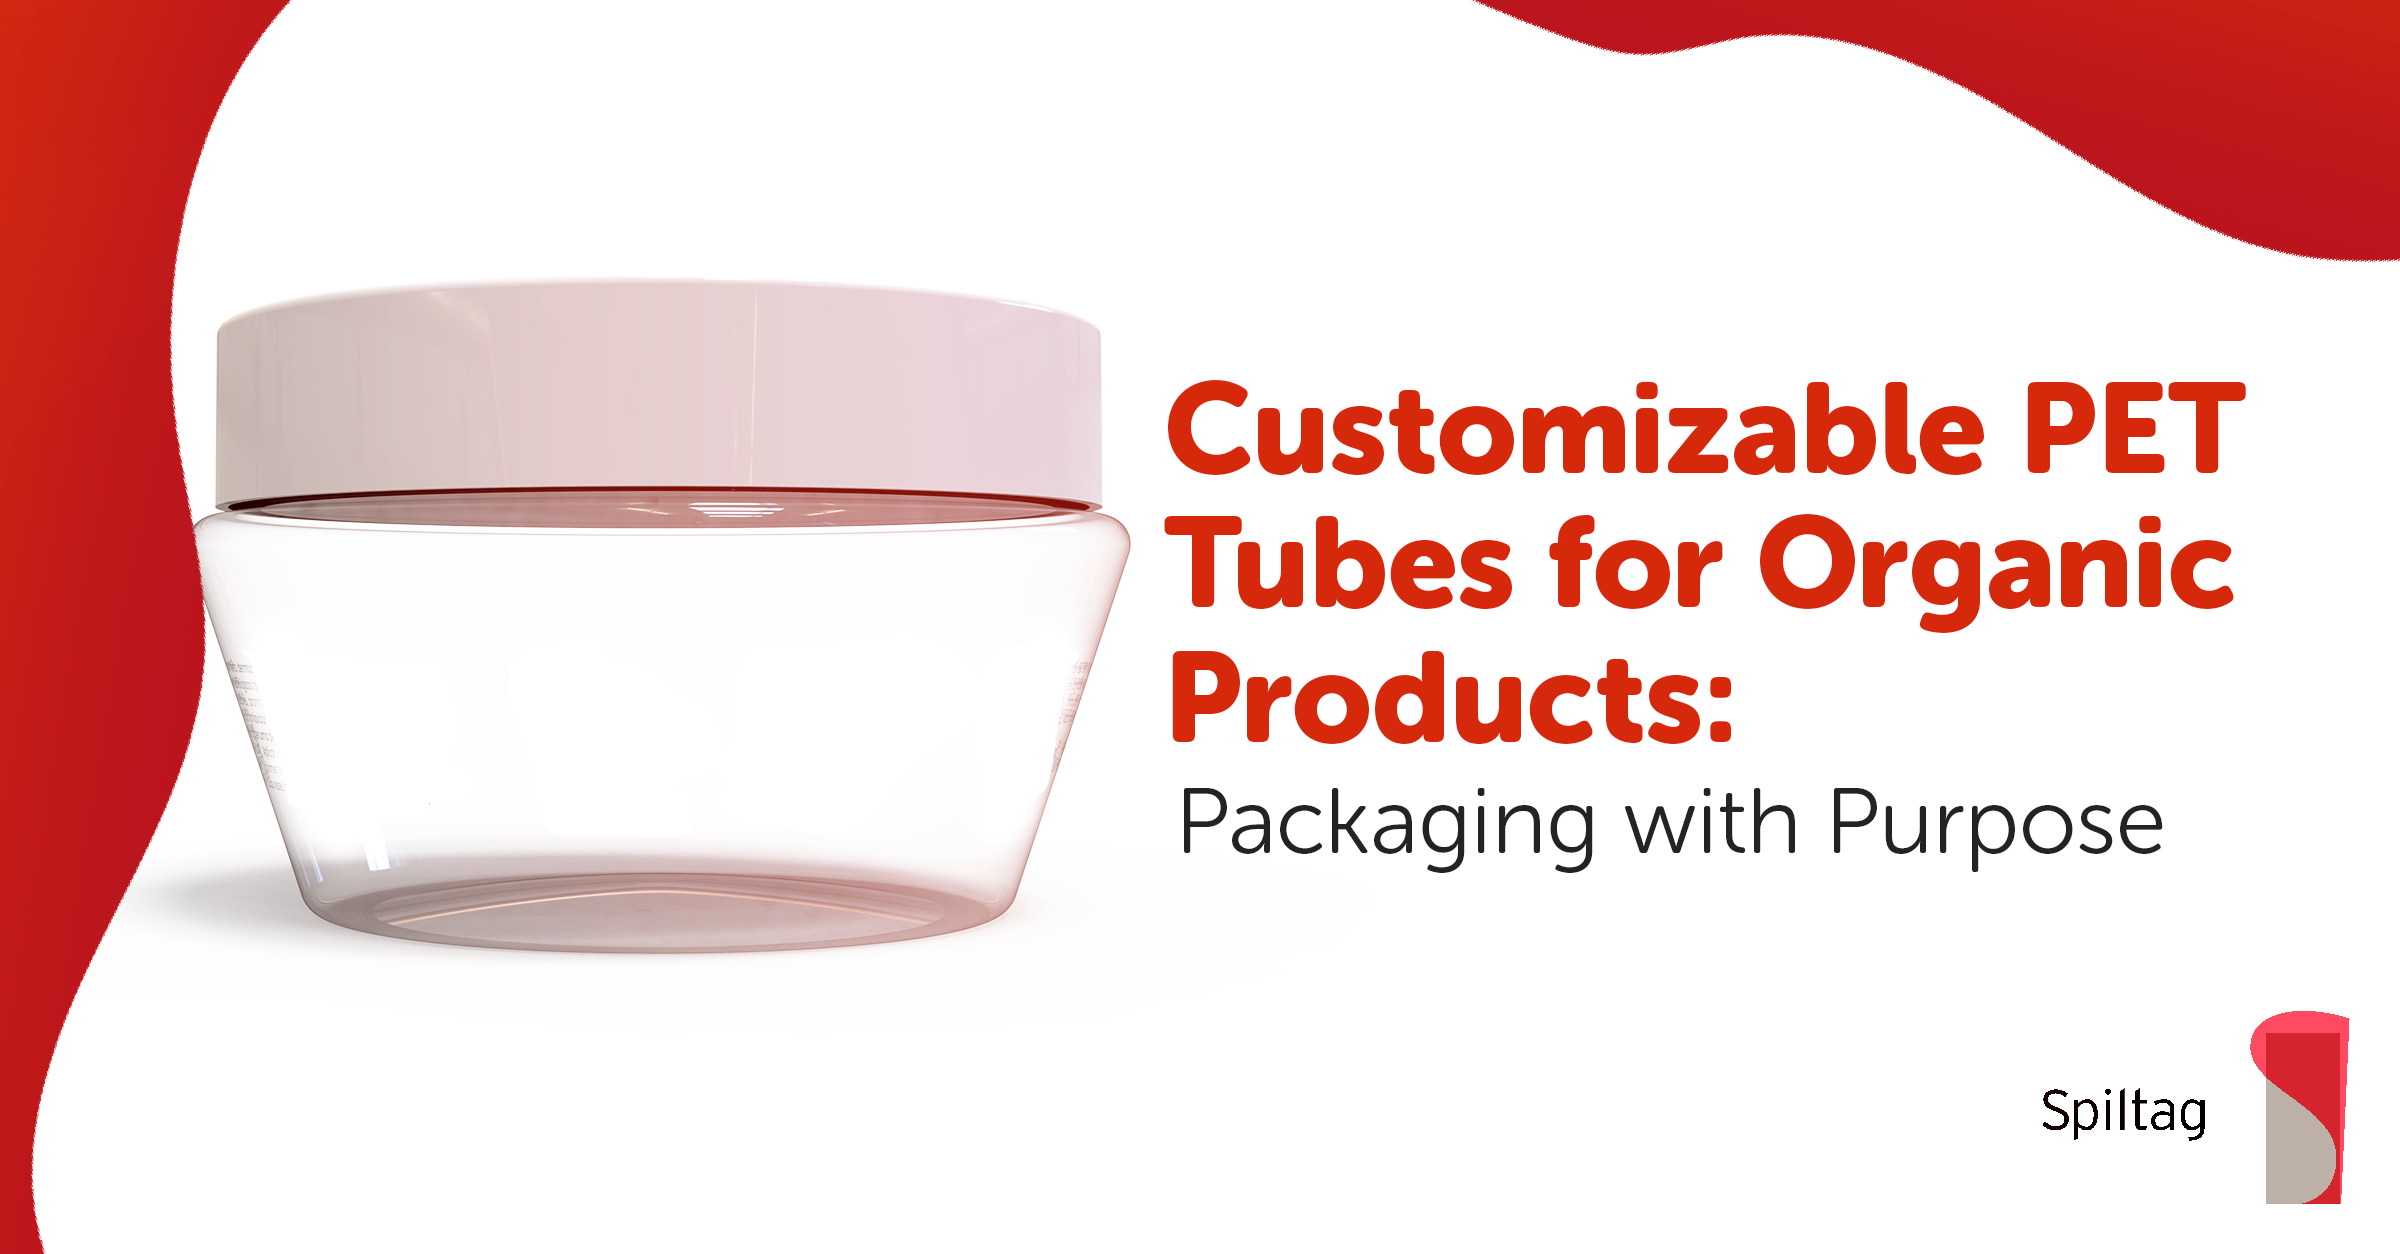 Customizable PET tubes for organic products